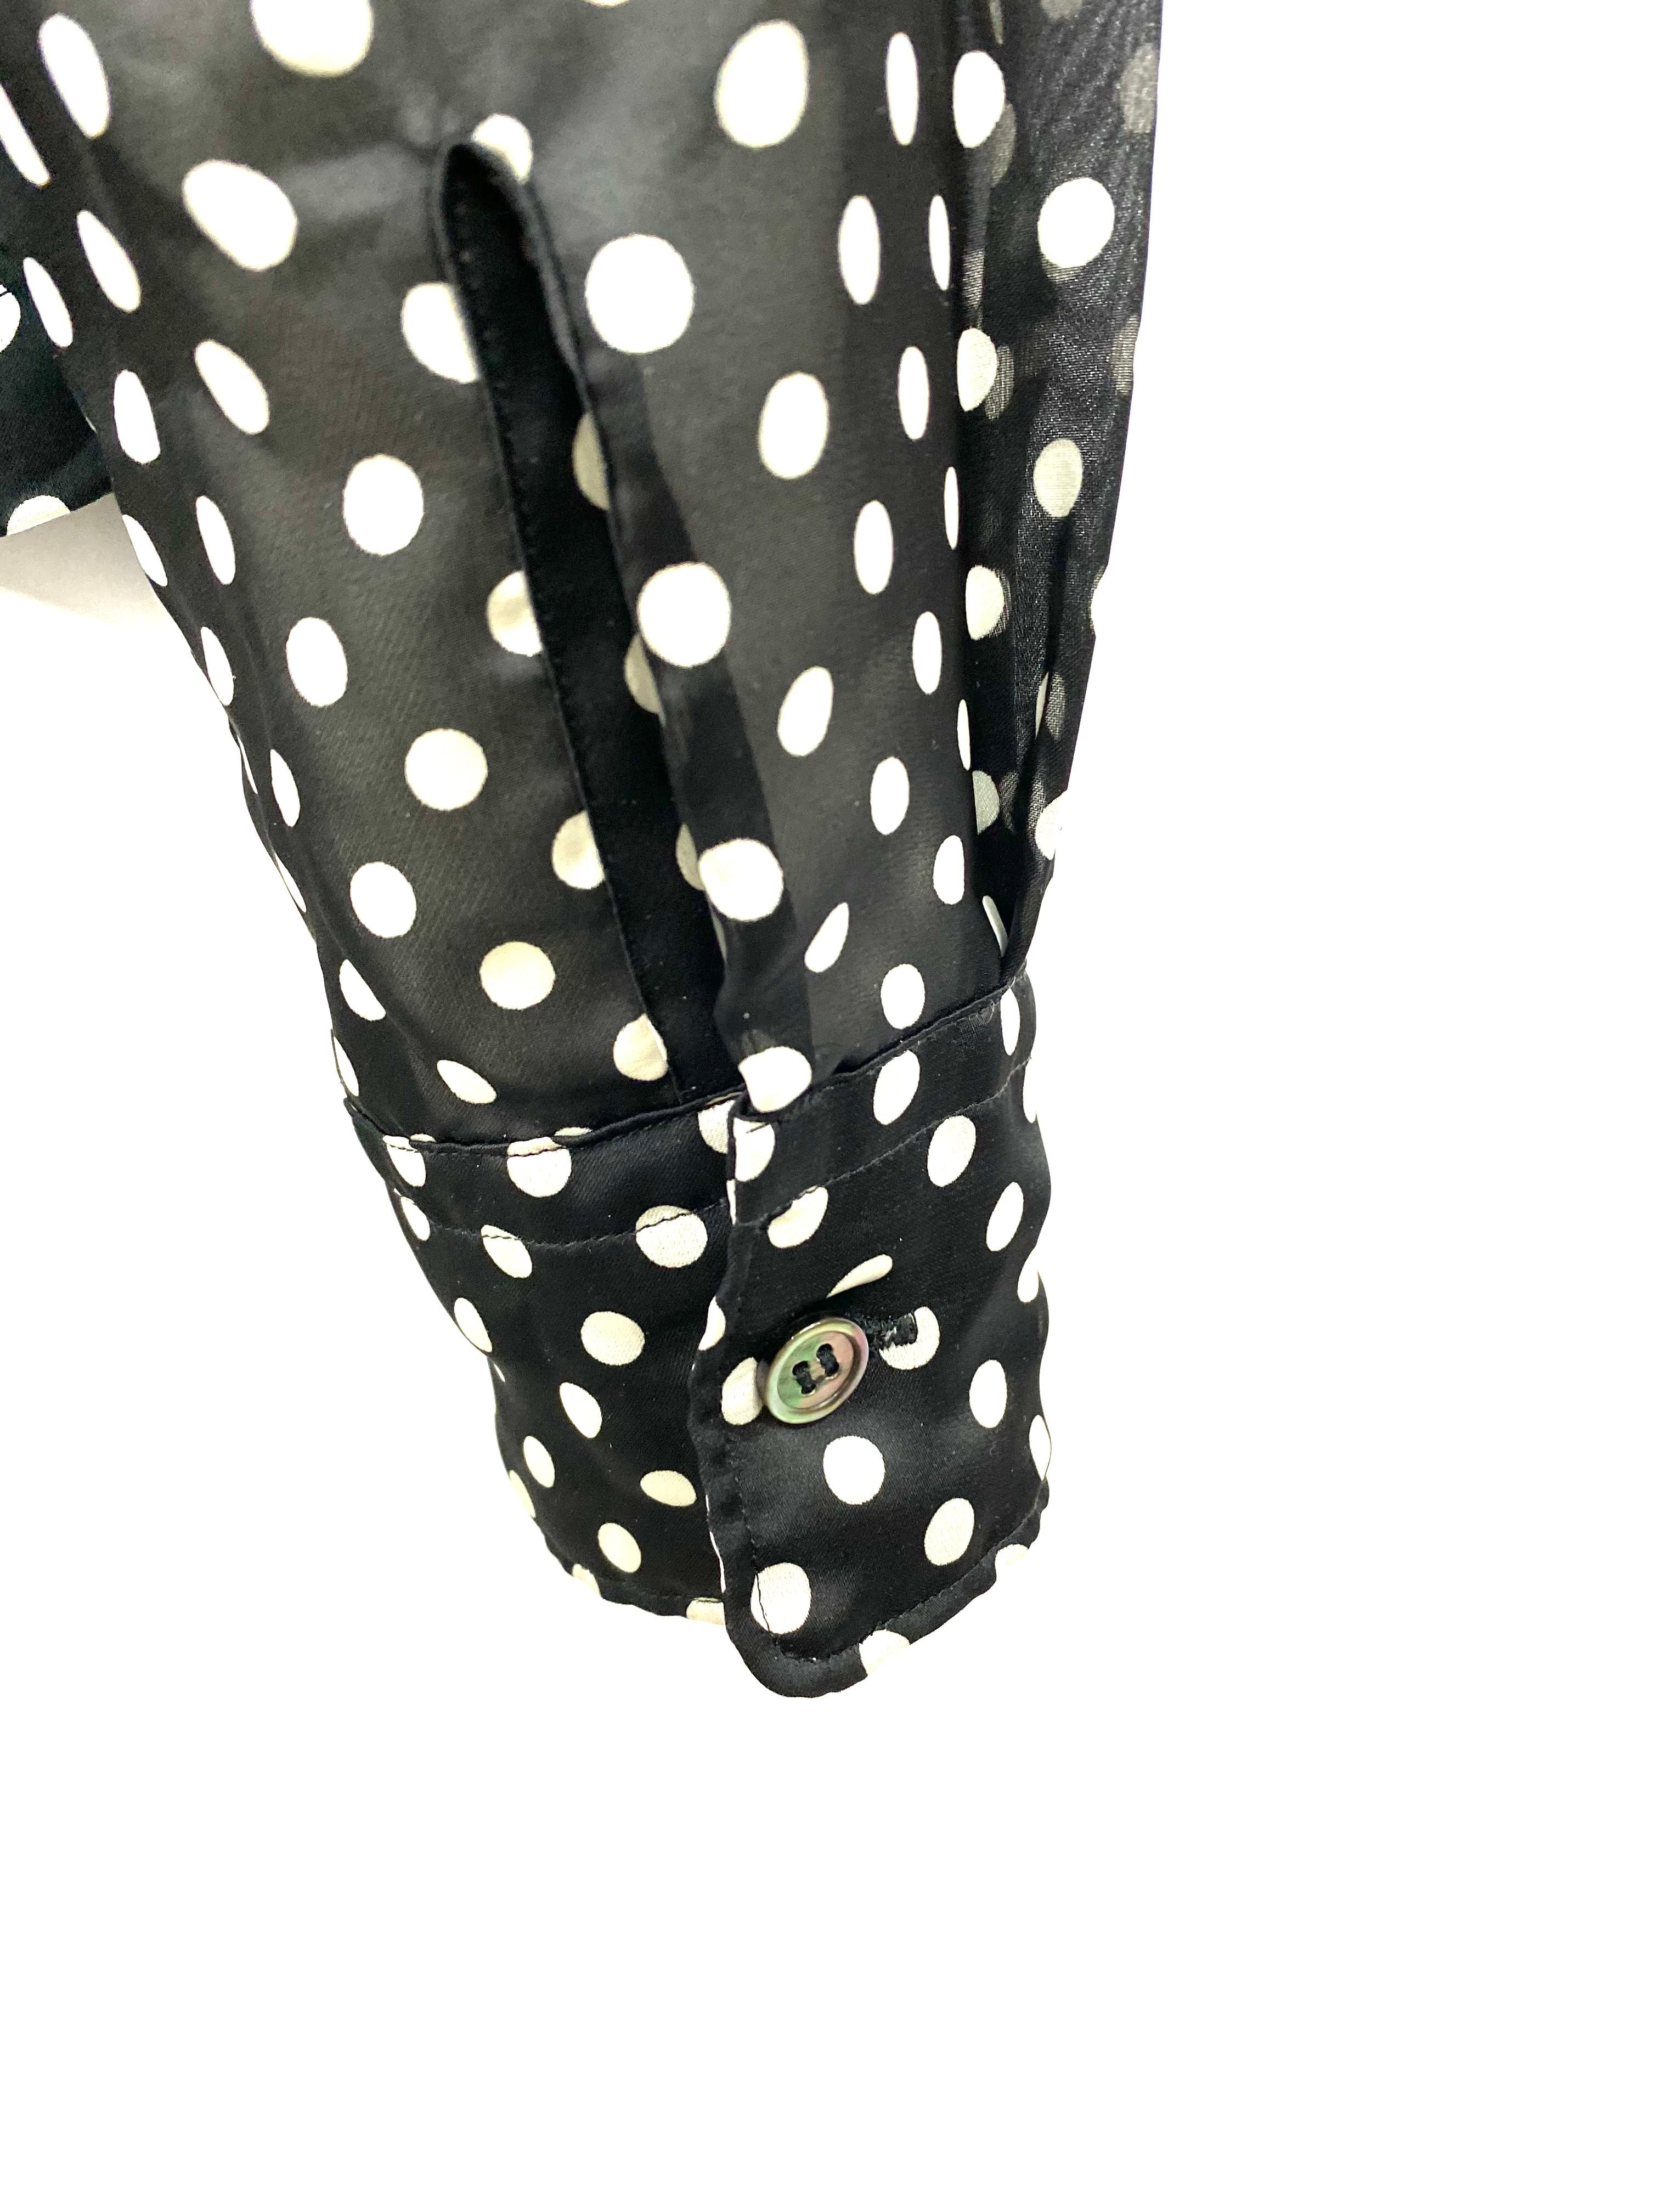 Comme des Garcons Black and White Polka Dot Blouse Top, Size Small In Excellent Condition For Sale In Beverly Hills, CA